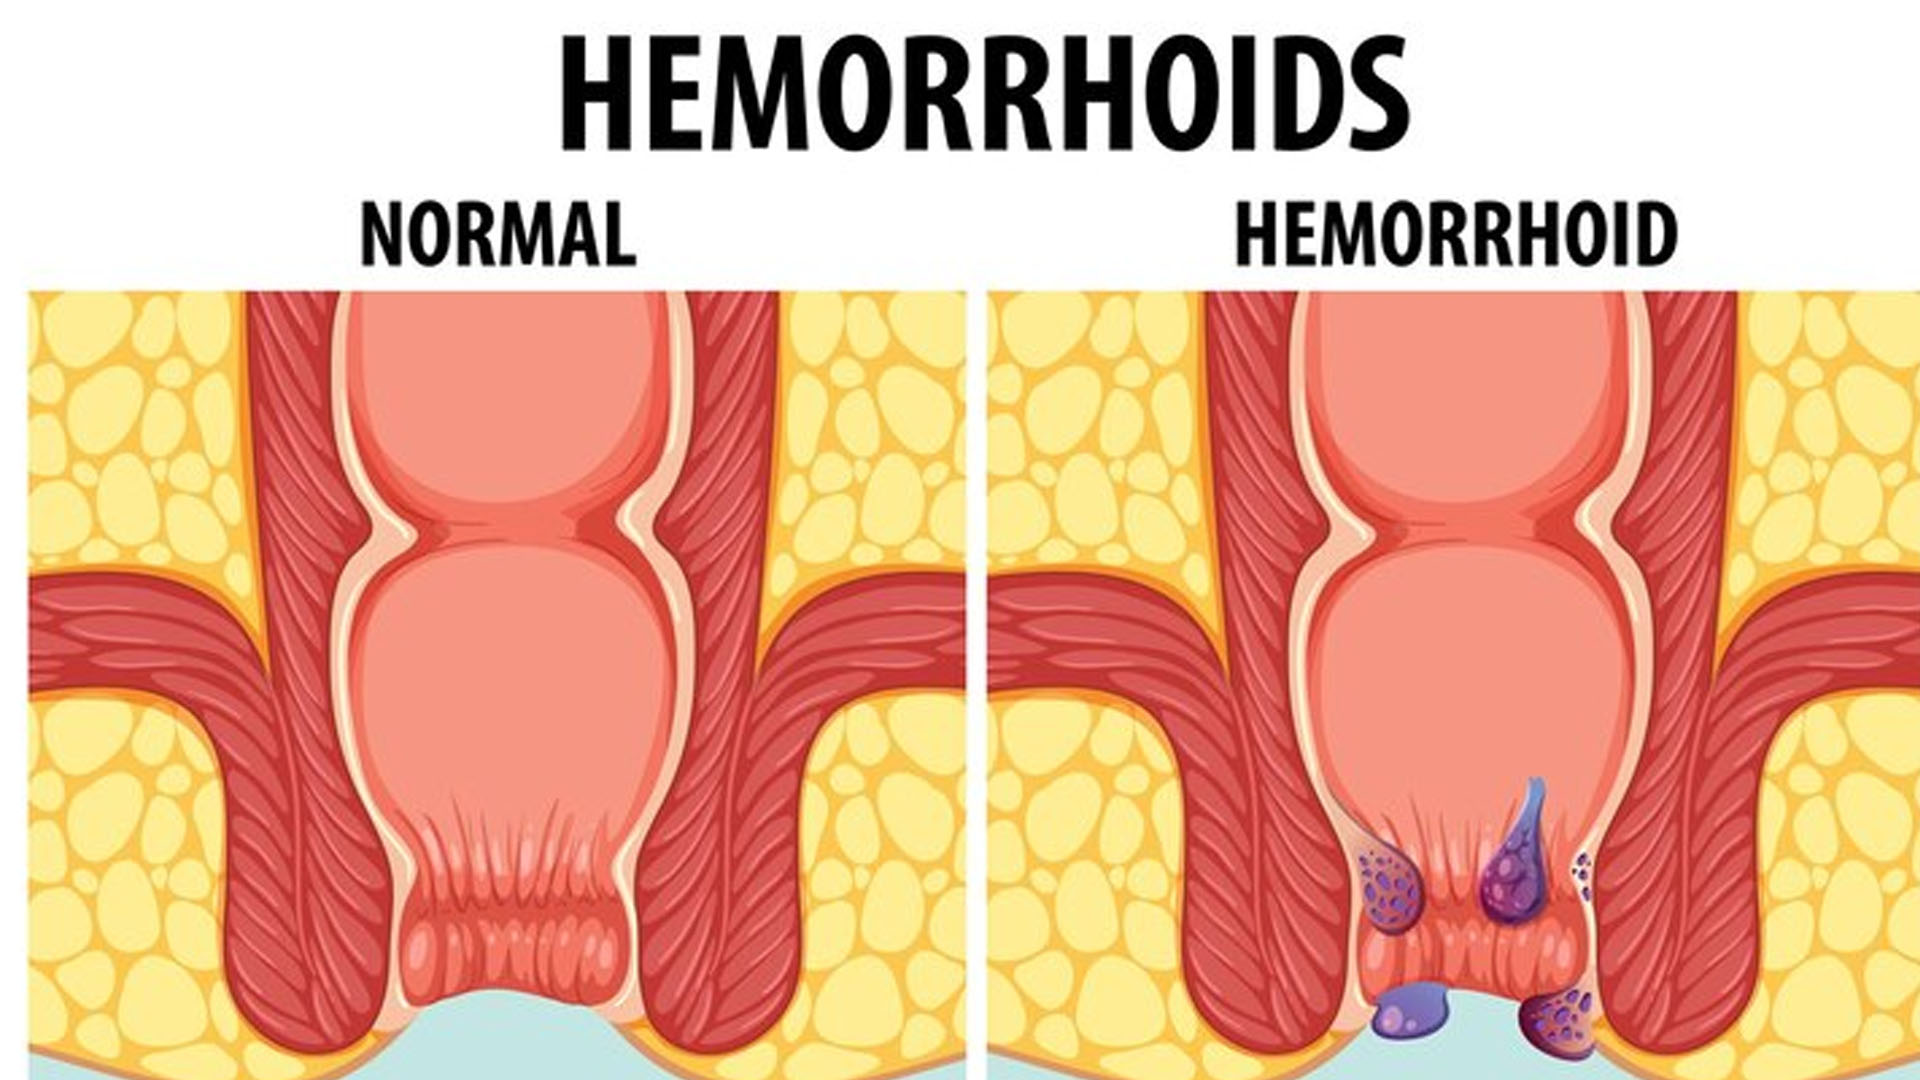 What are the Home Remedies for Hemorrhoids?